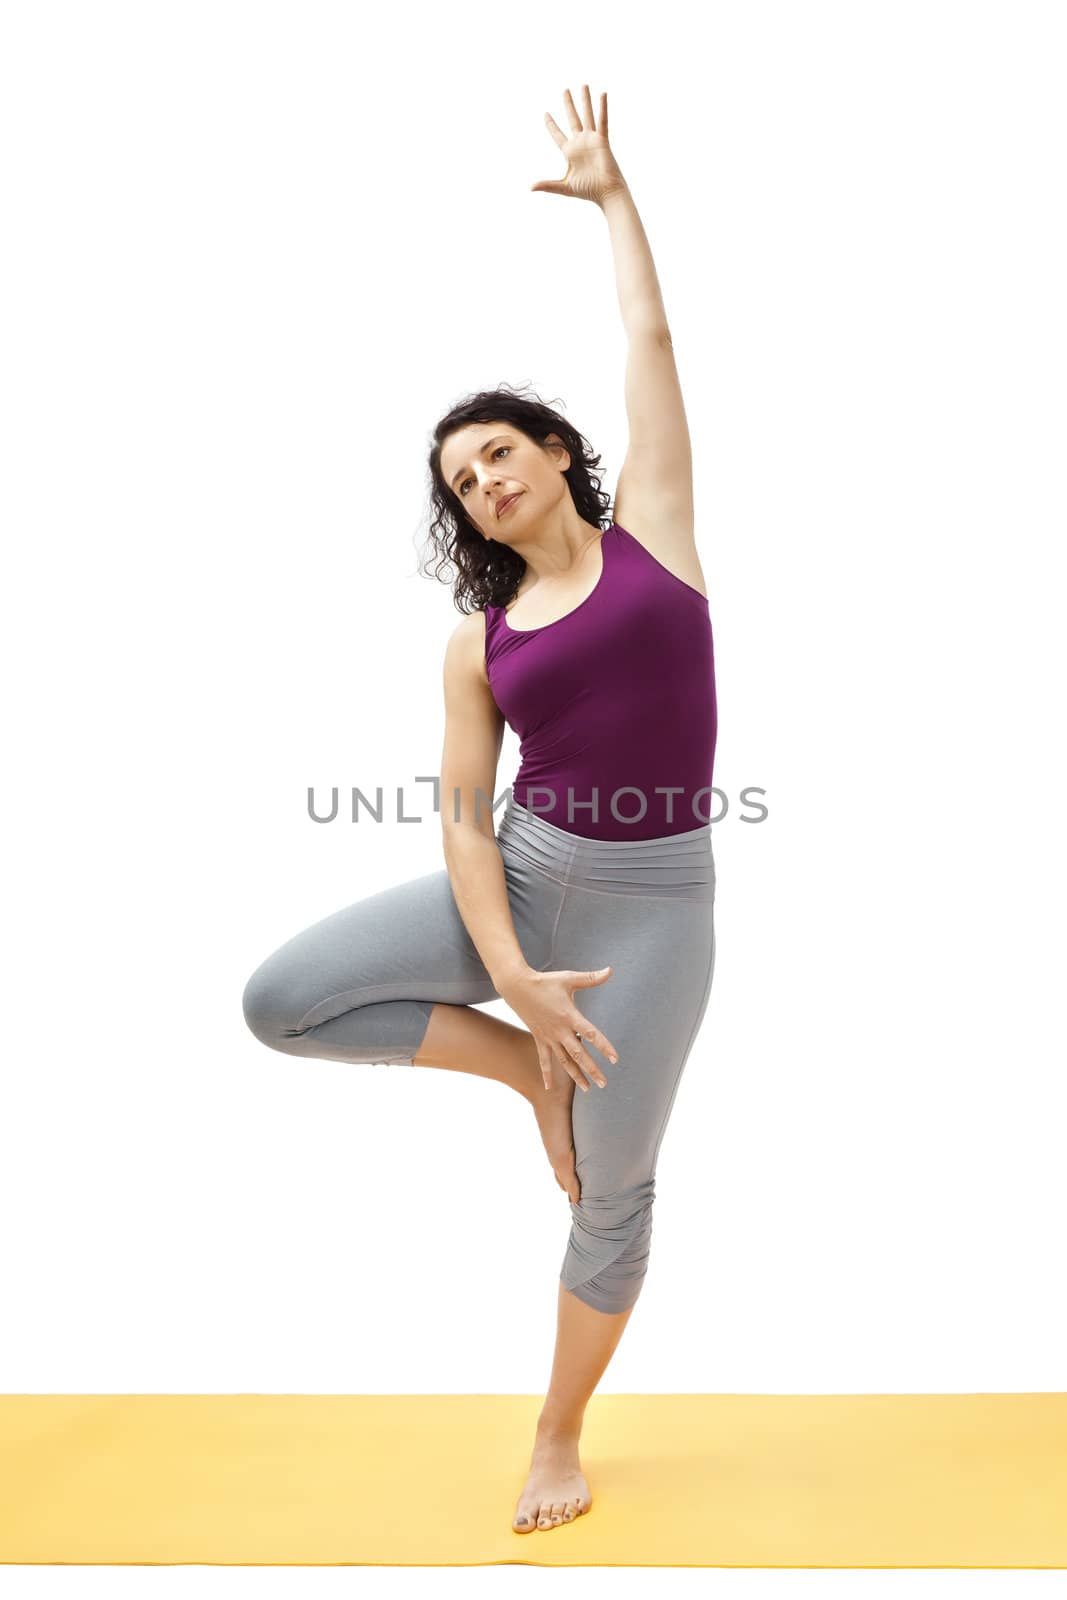 An image of a pretty woman doing yoga